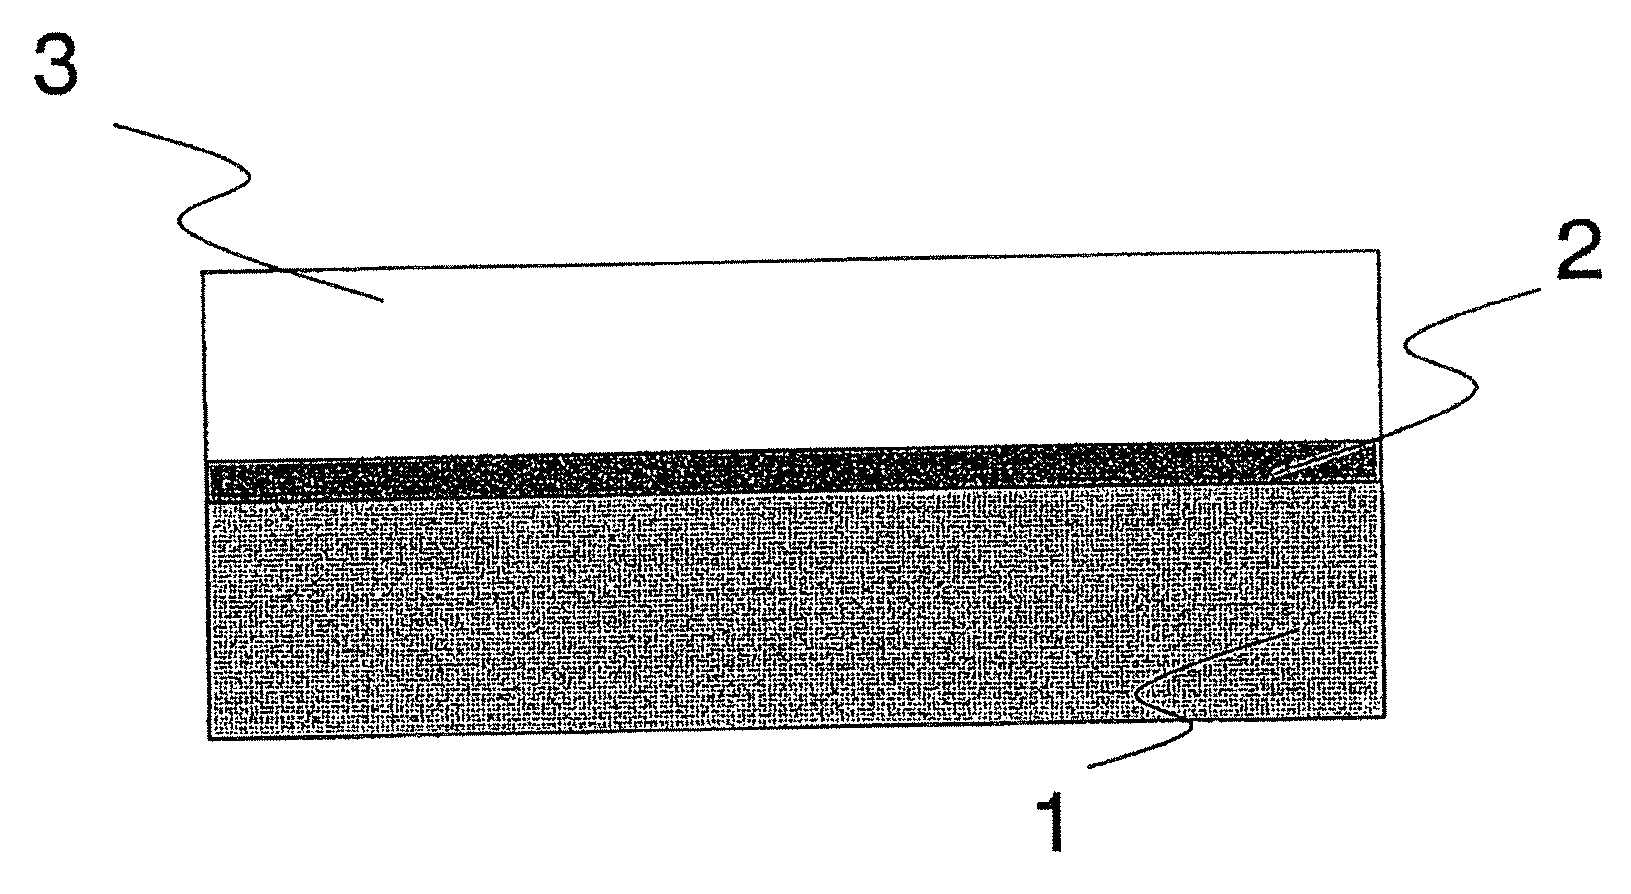 Protective Film Structure of Metal Member, Metal Component Employing Protective Film Structure, and Equipment for Producing Semiconductor or Flat-Plate Display Employing Protective Film Structure